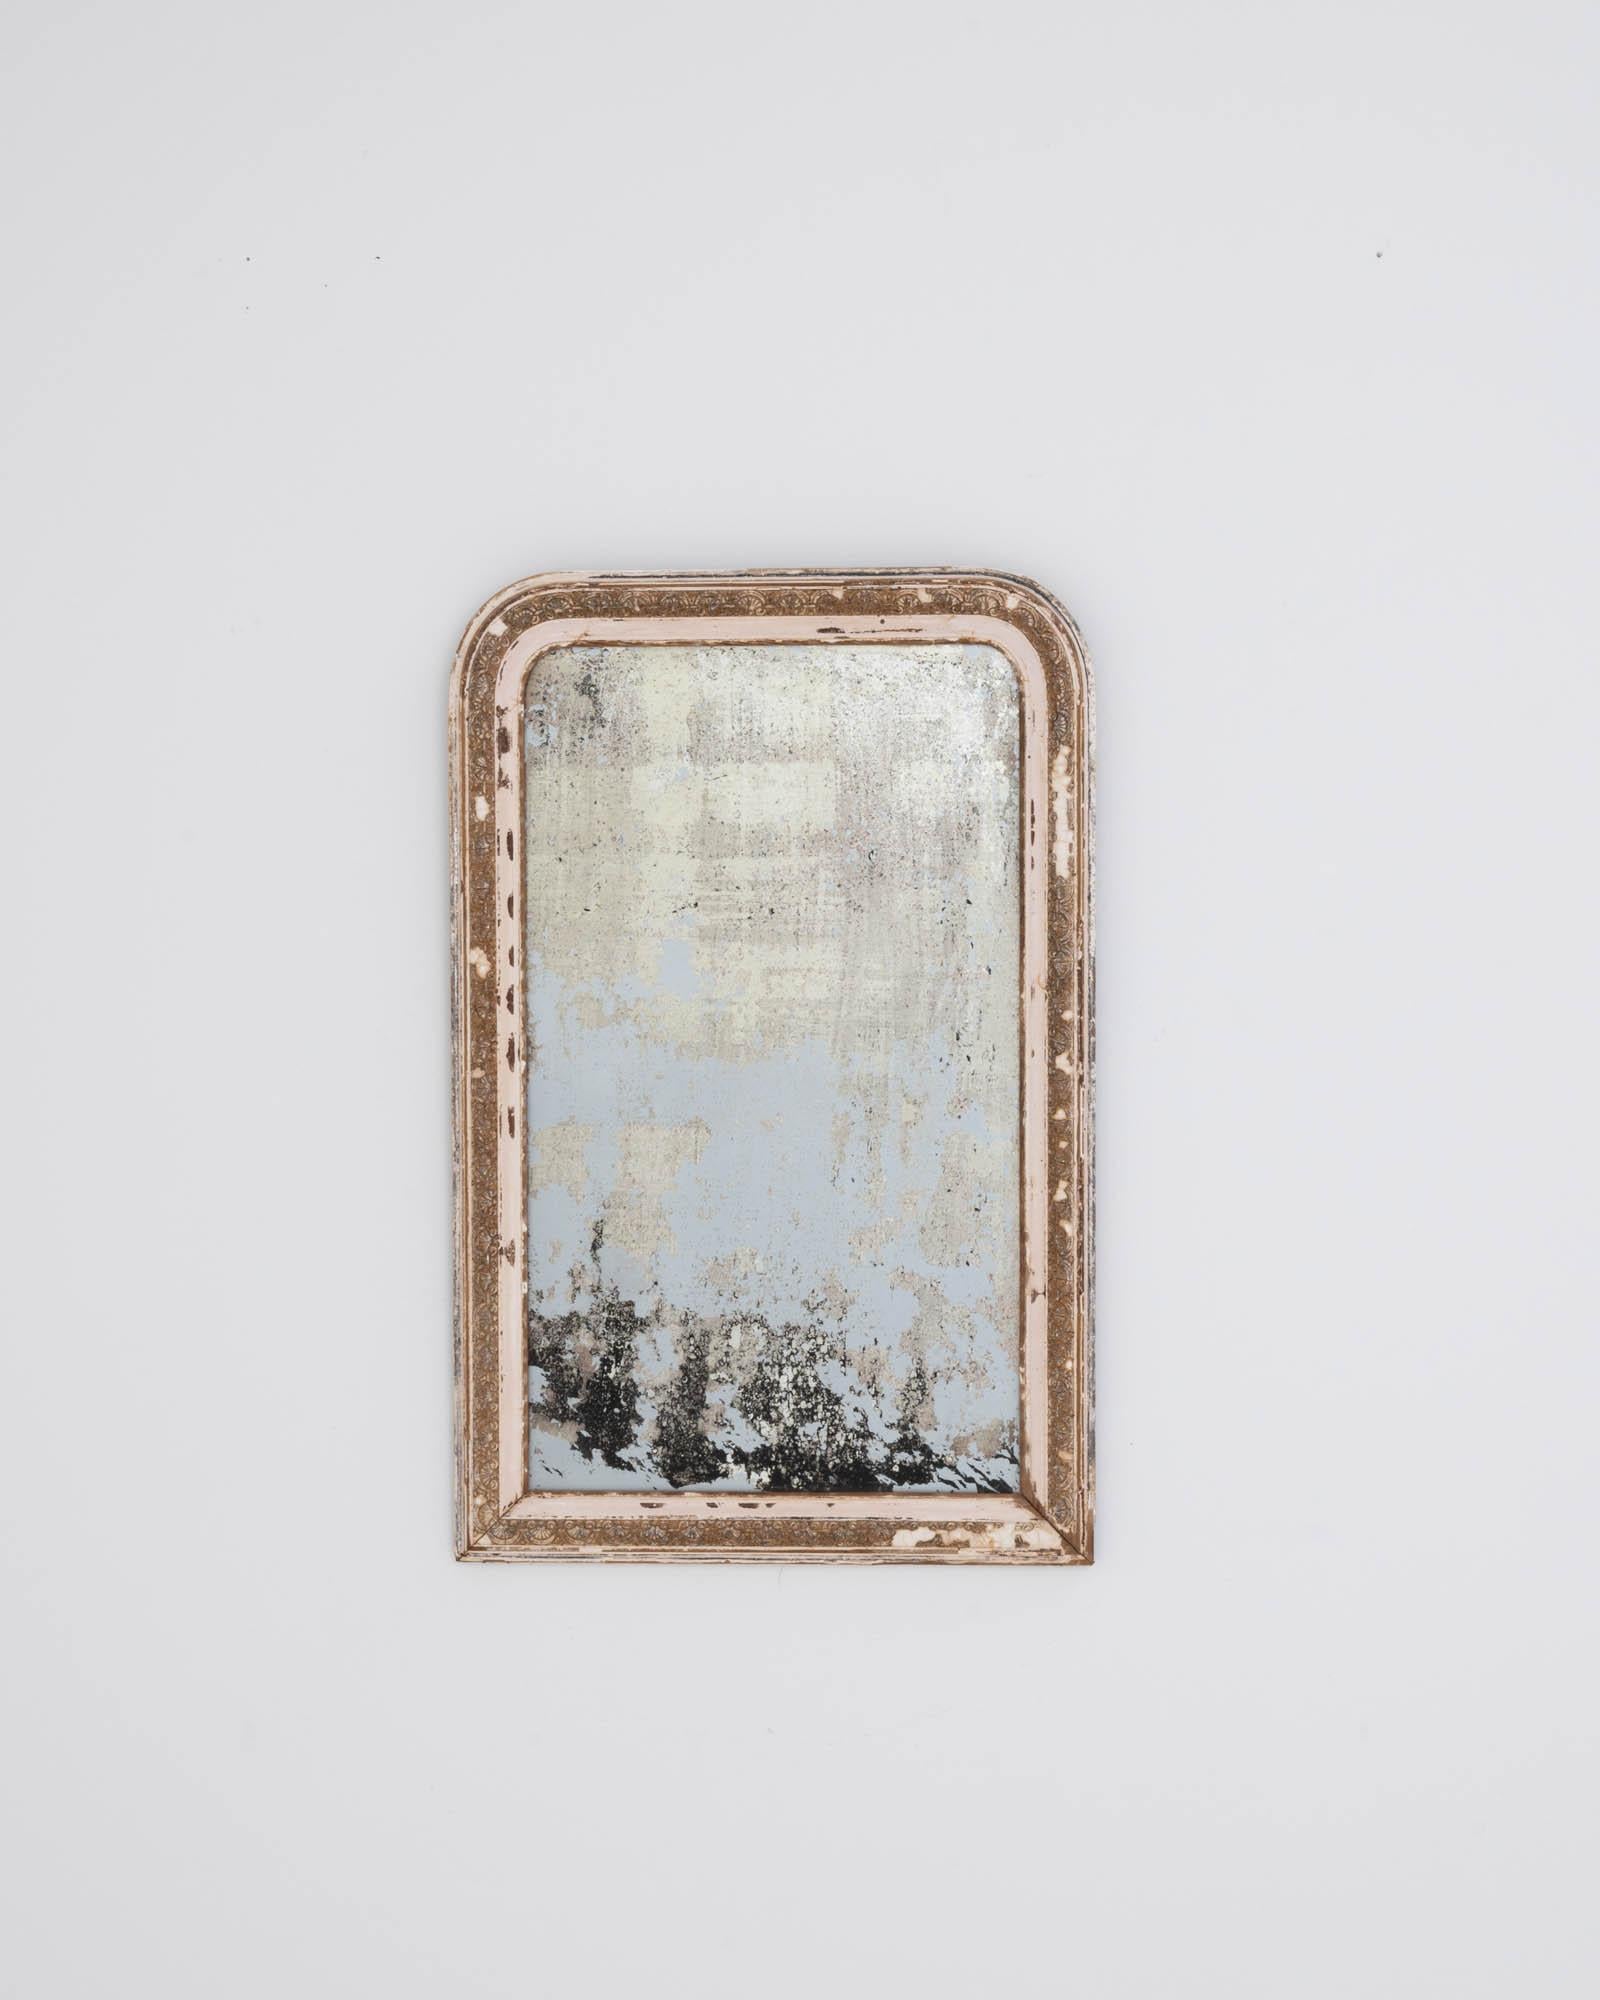 A wooden mirror created in 19th century France. Proudly aged, the paint has worn to a time touched patina, unveiling ochre hues, speckled with grey to shine a noble contrast on the arched frame. This one of a kind mirror combines traditional design